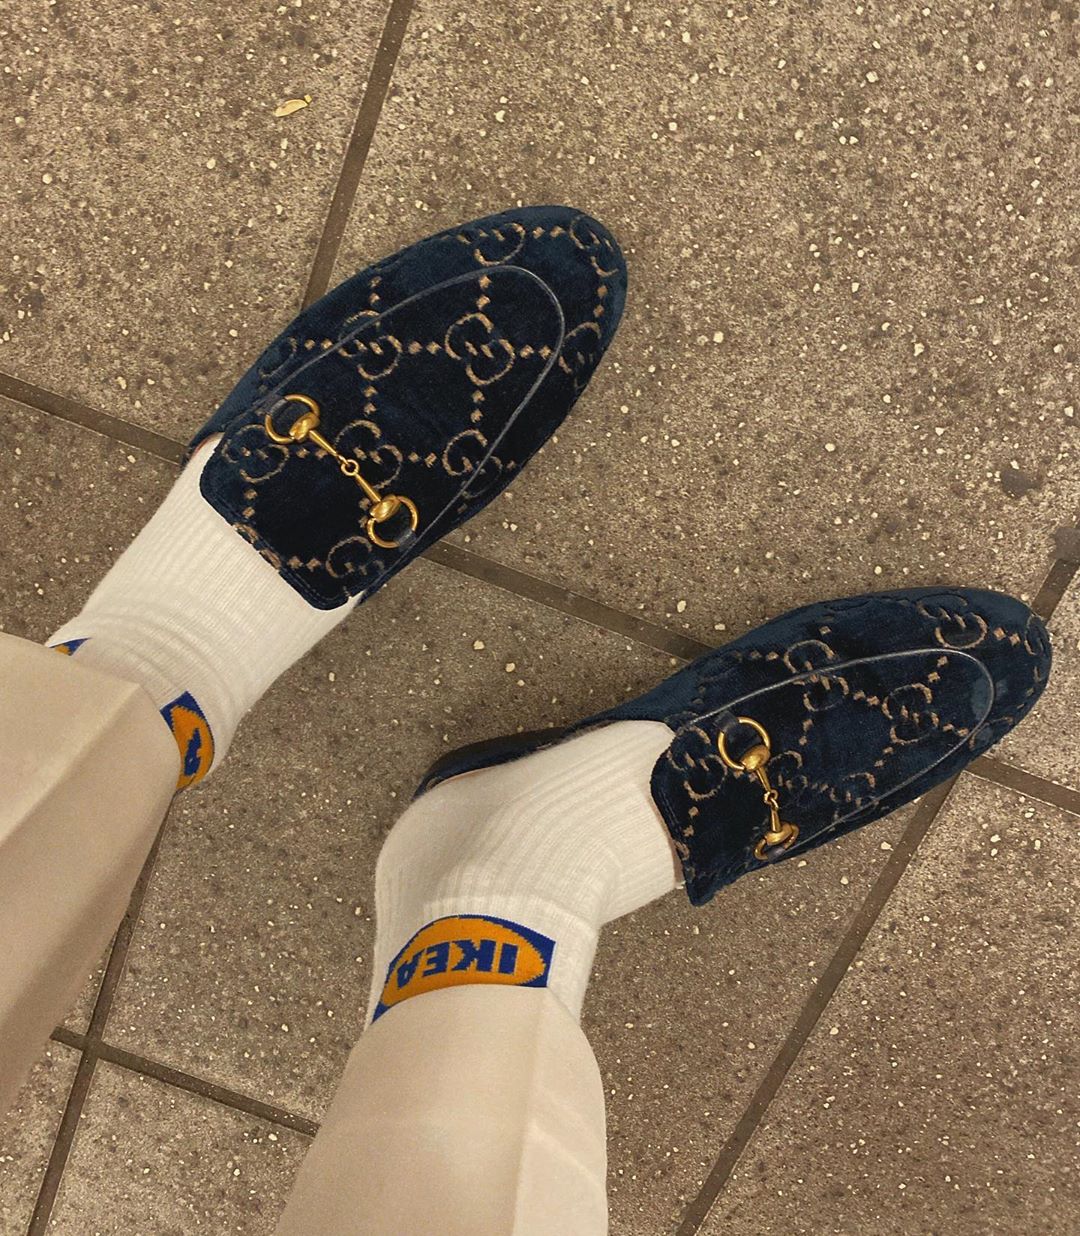 Ikea Socks and Gucci Loafers